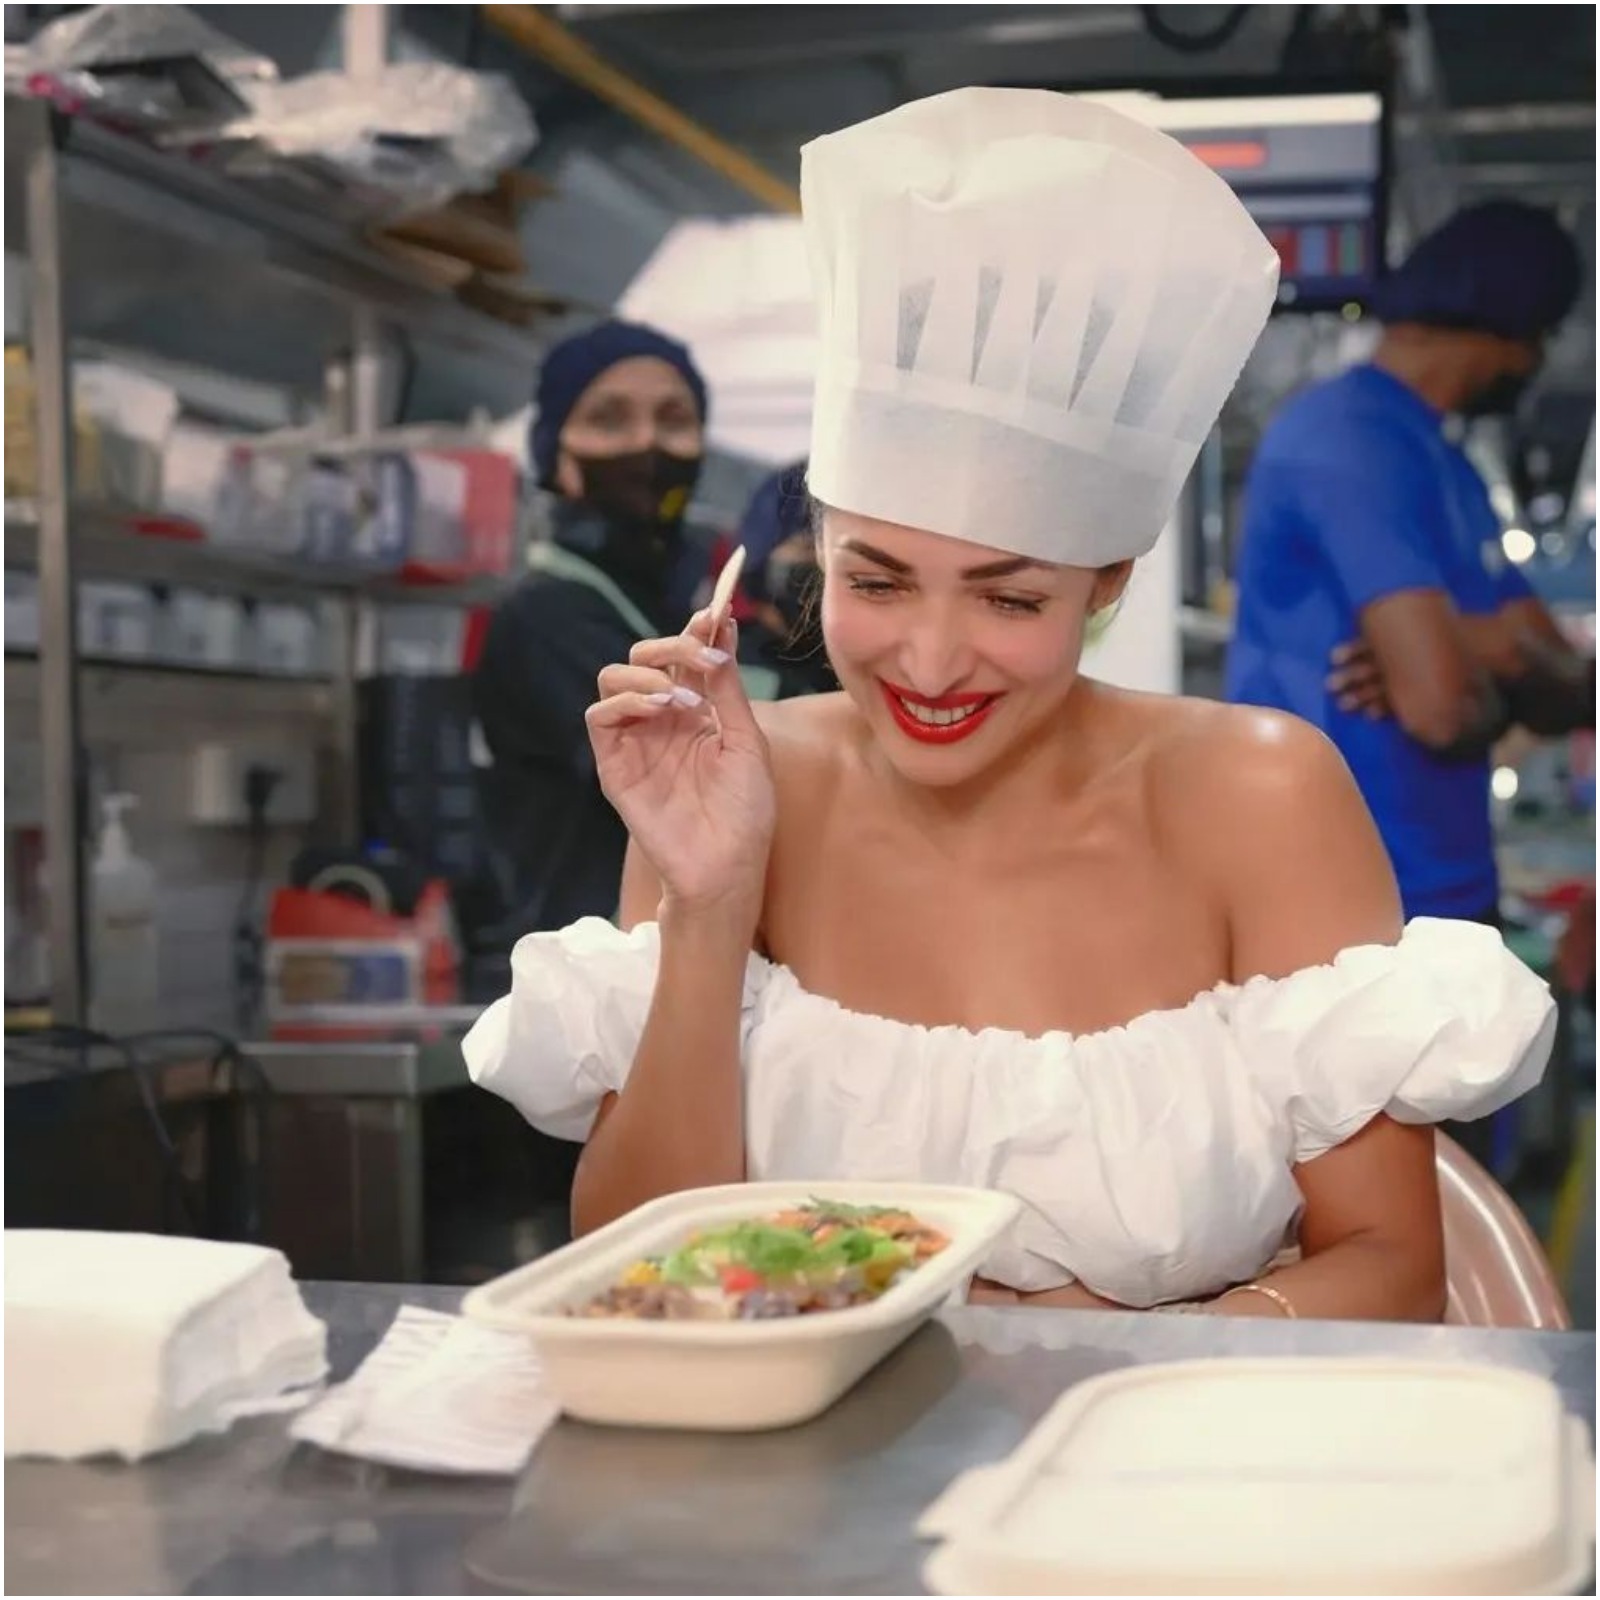 Malaika Arora seen donning the chef's hat while visiting her restaurant